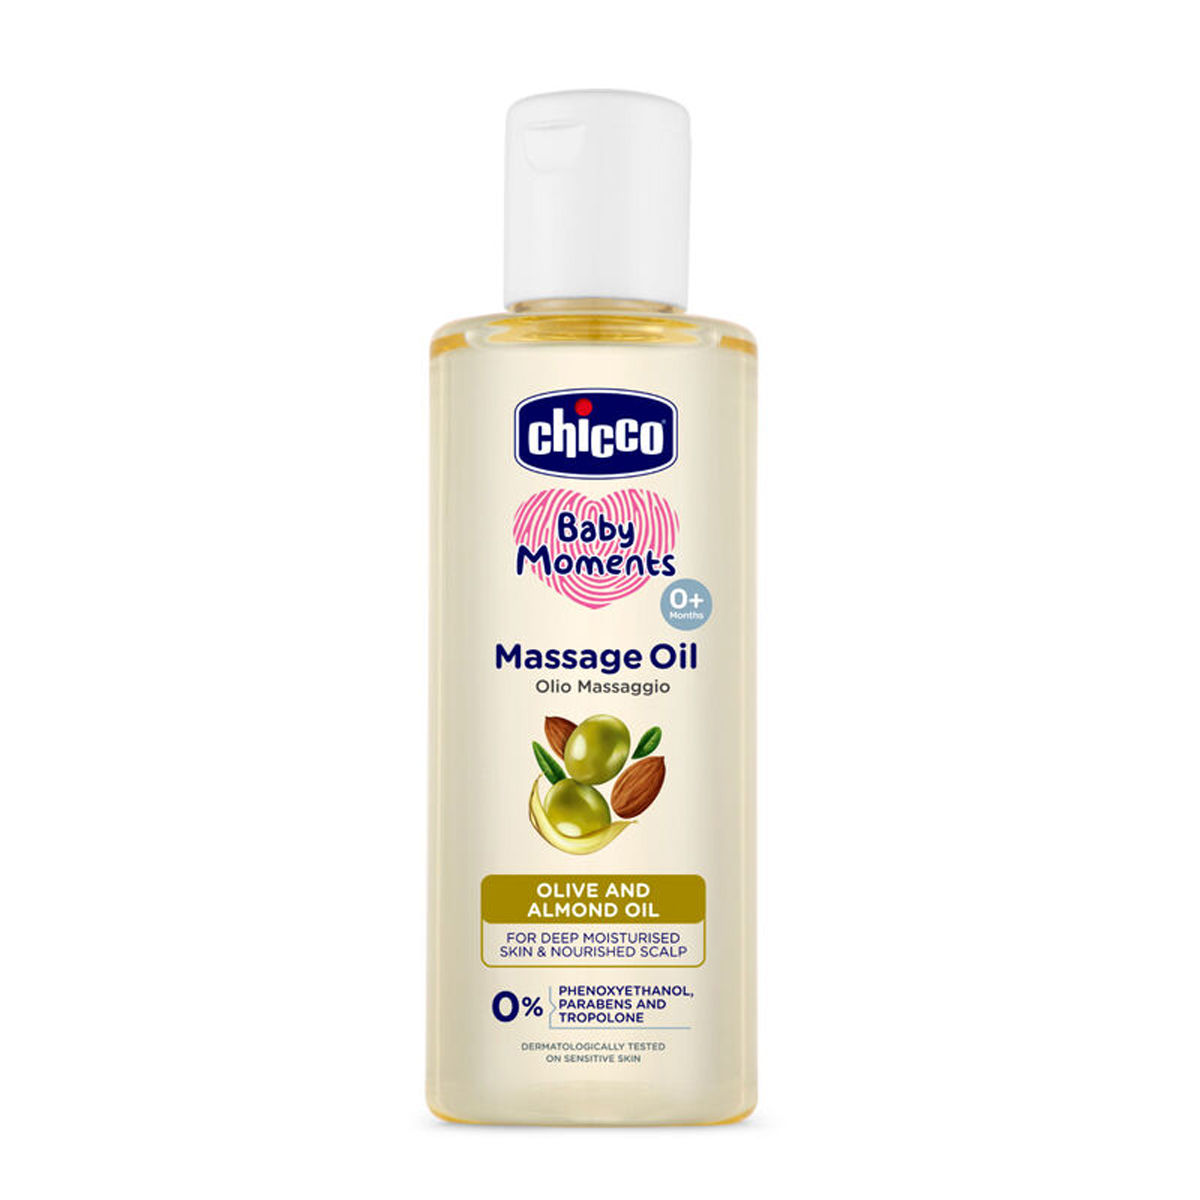 Chicco Baby Moments Massage Oil, 200 ml, Pack of 1 